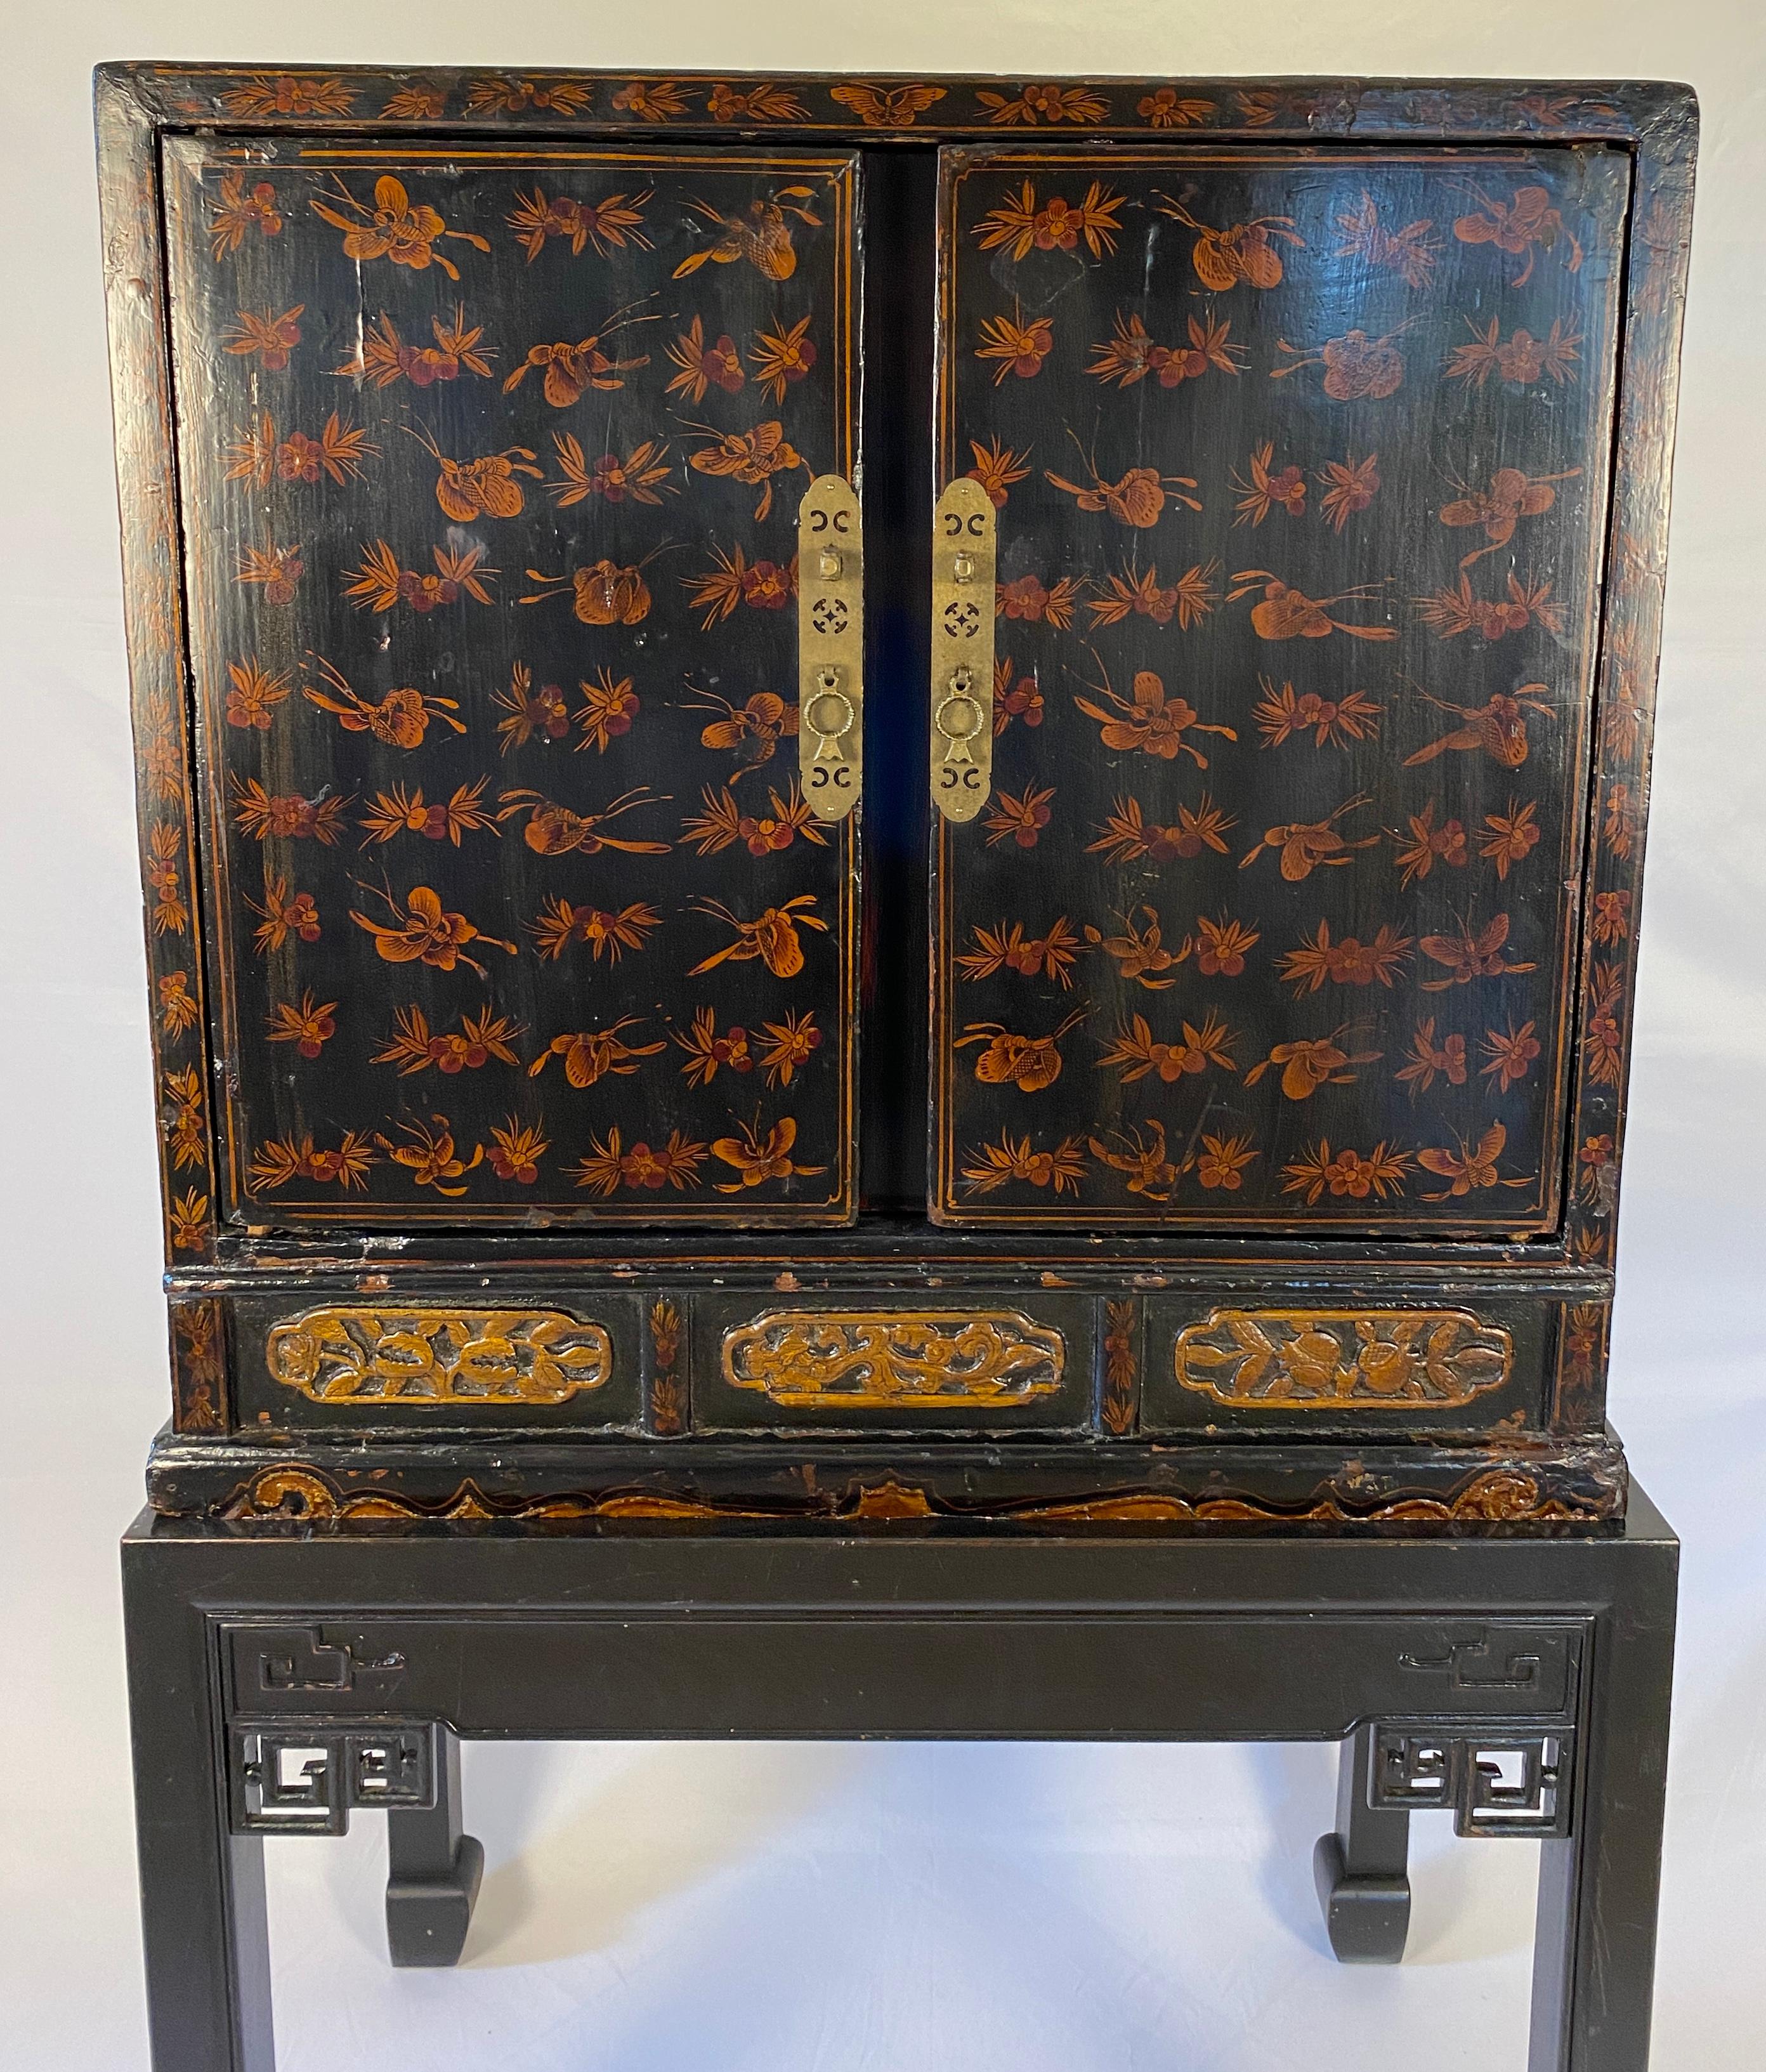 A fine quality 19th Century Chinese Red Lacquered Qing Dynasty Cabinet with Chinoiserie Décor. Chinese Dry Bar Cabinet. 

This handcrafted two part Chinese Red Lacquered Qing Dynasty 19th Century Cabinet with Chinoiserie Décor is hand-carved,